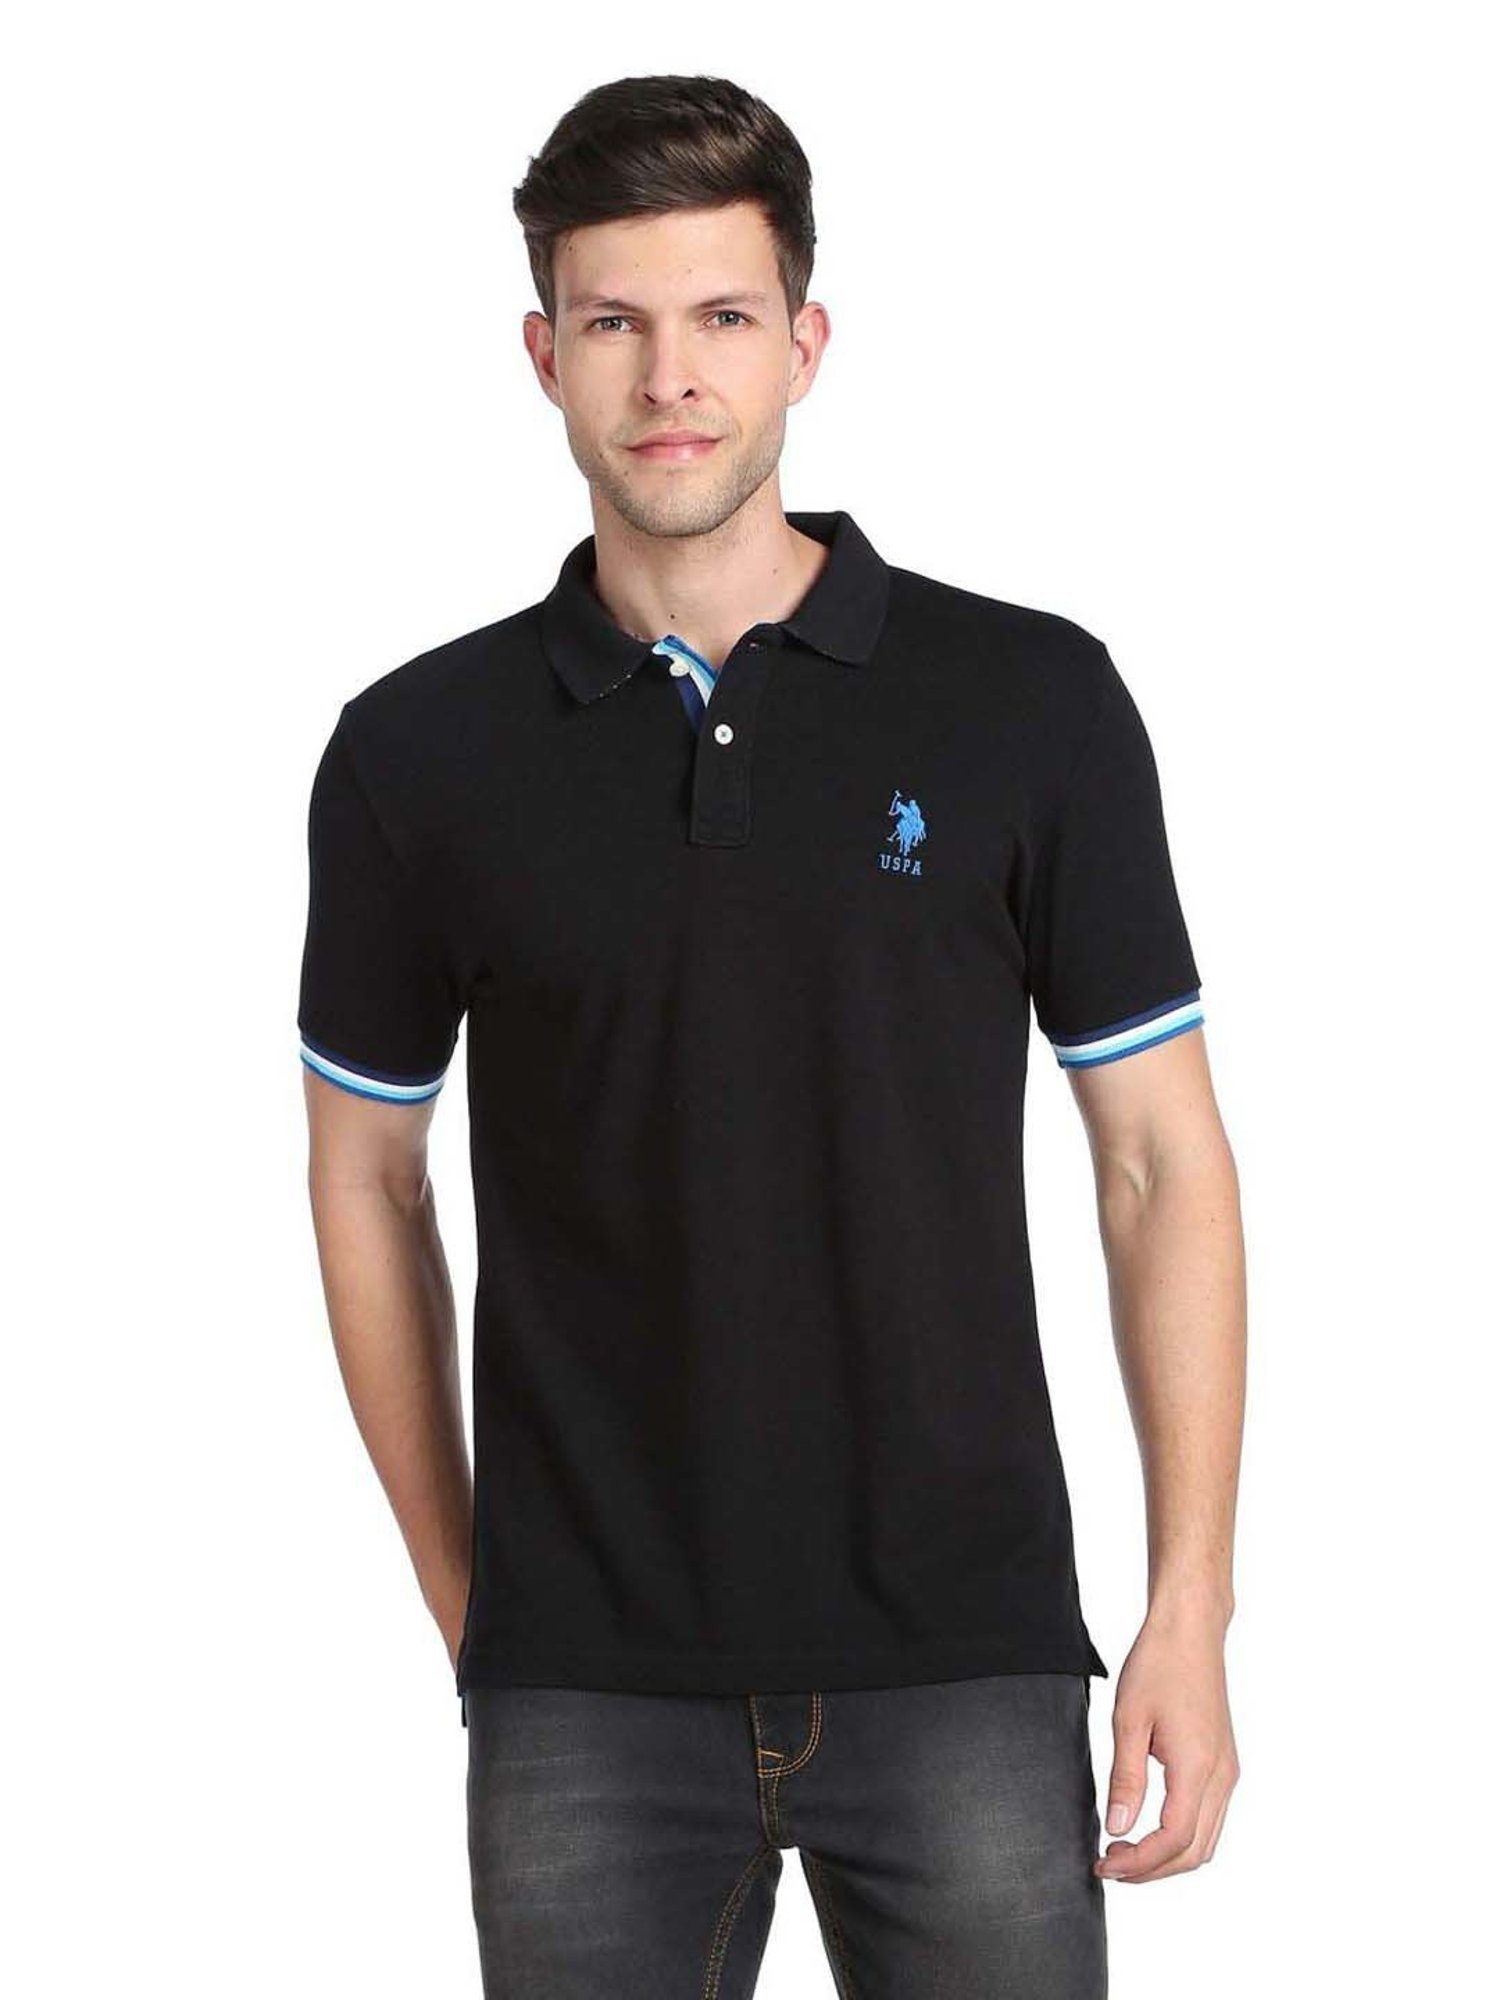 U.s. Polo Assn. Mens Slim Fit Short Sleeve Polo Shirt With